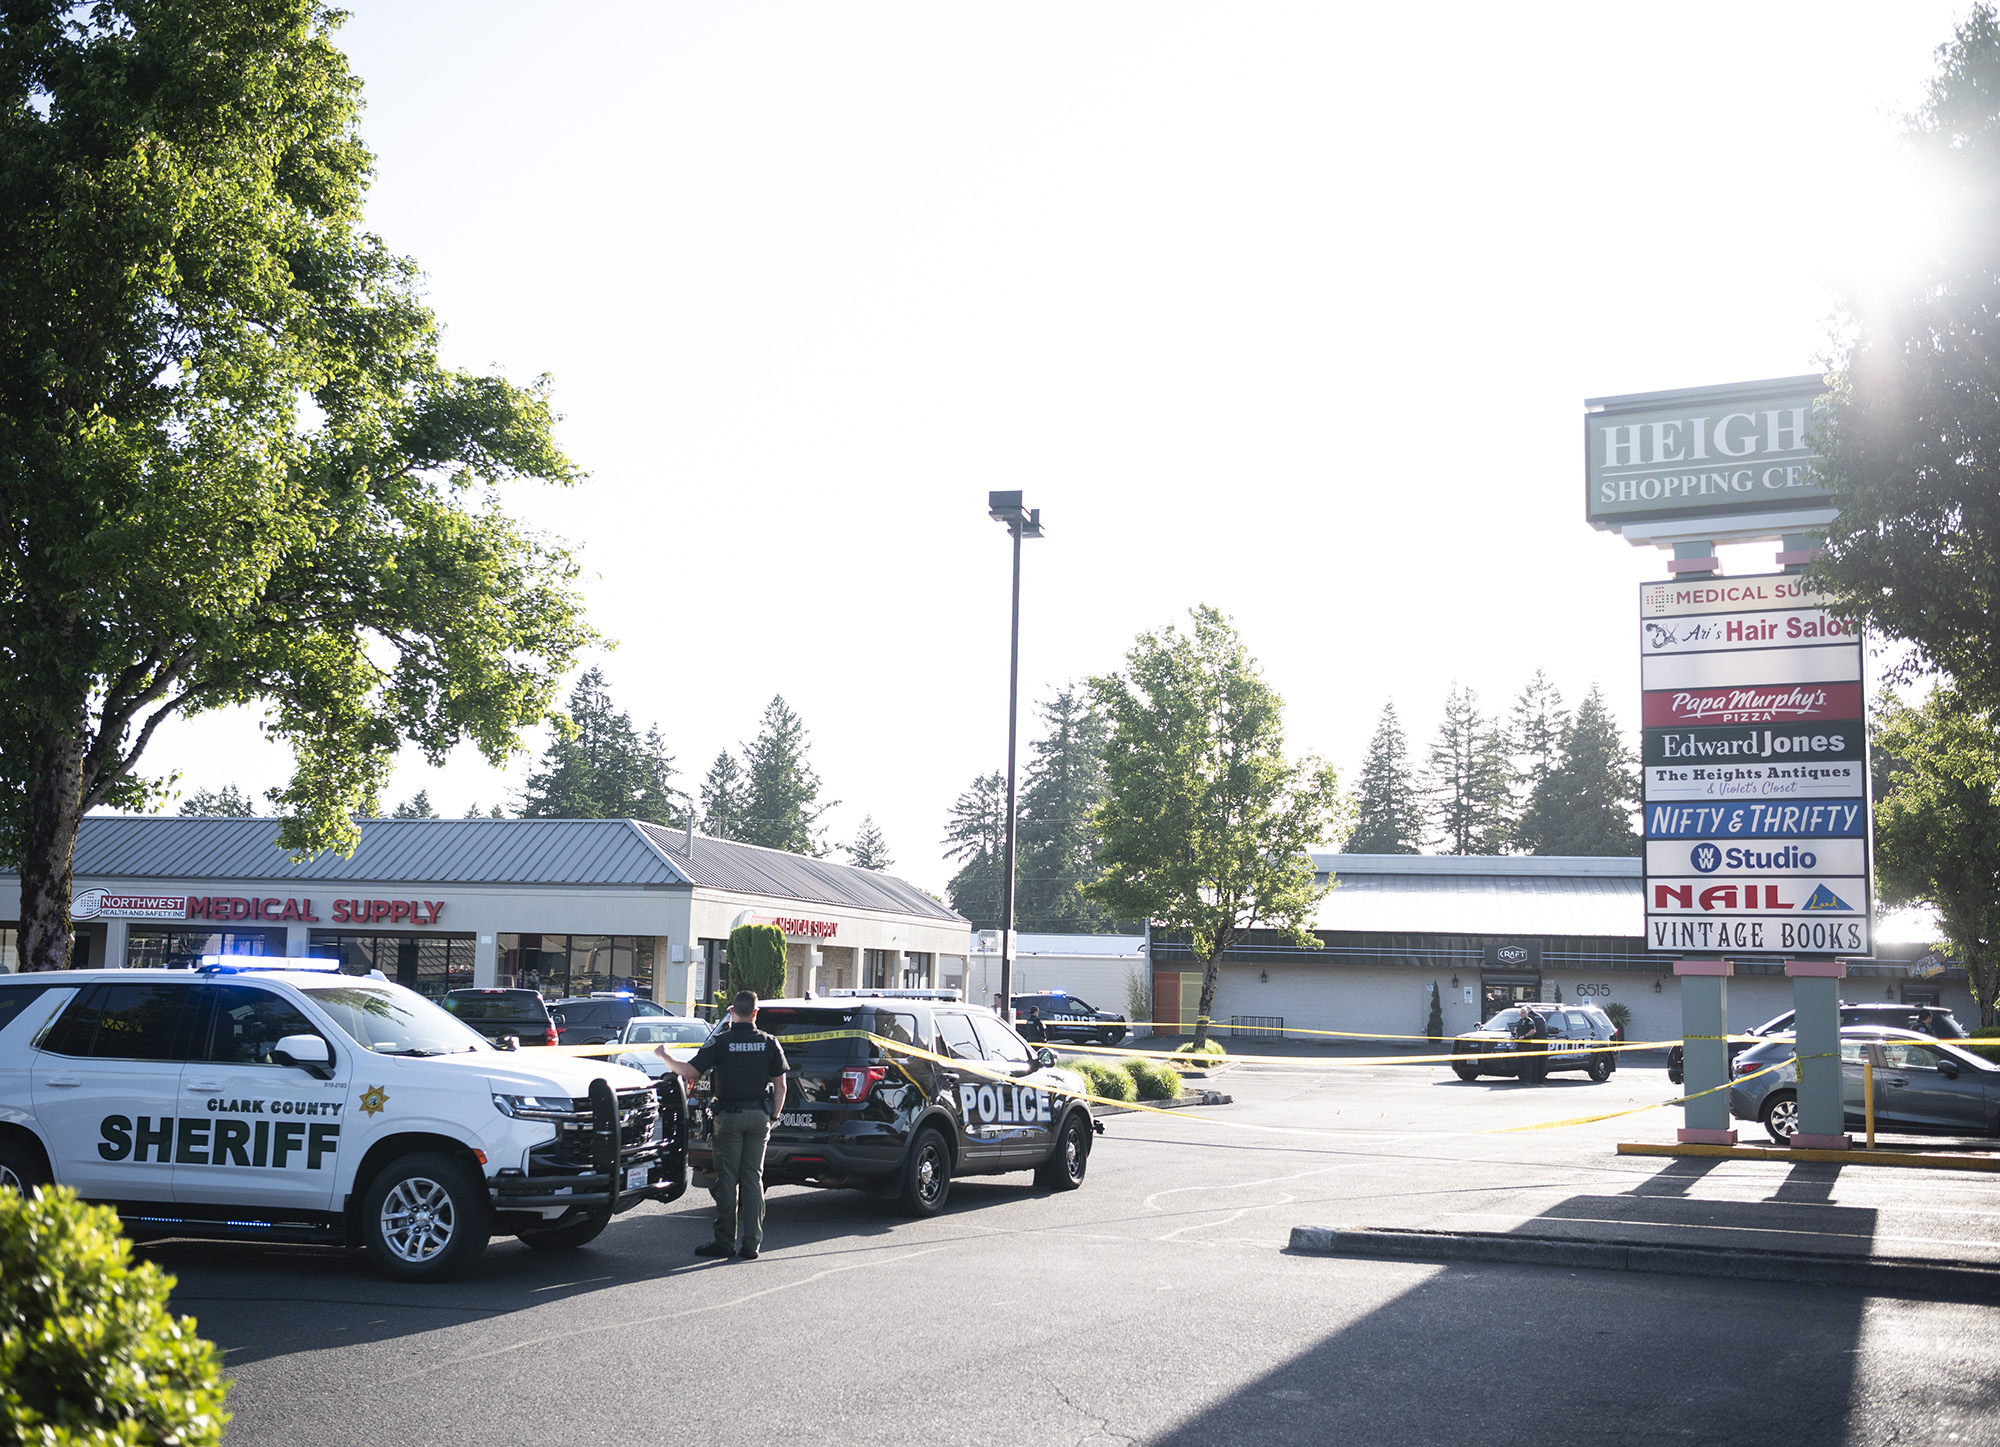 Clark County Sheriffs Office and Vancouver Police Department vehicles sit around police tape on Tuesday, May 30, 2023, at the site of a fatal shooting in the Heights Shopping Center parking lot.